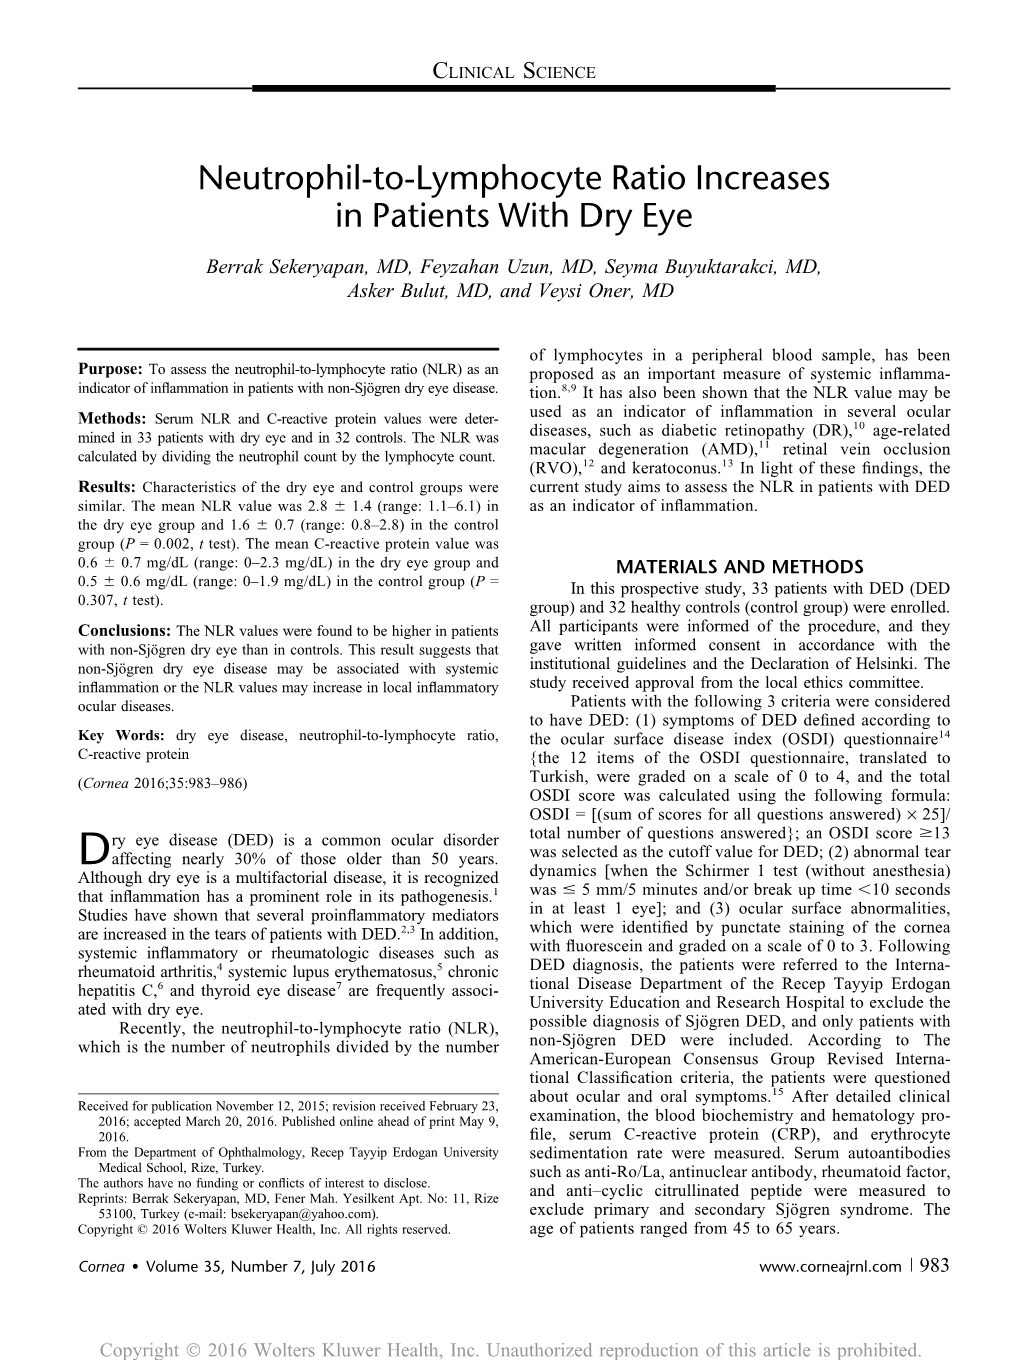 Neutrophil-To-Lymphocyte Ratio Increases in Patients with Dry Eye